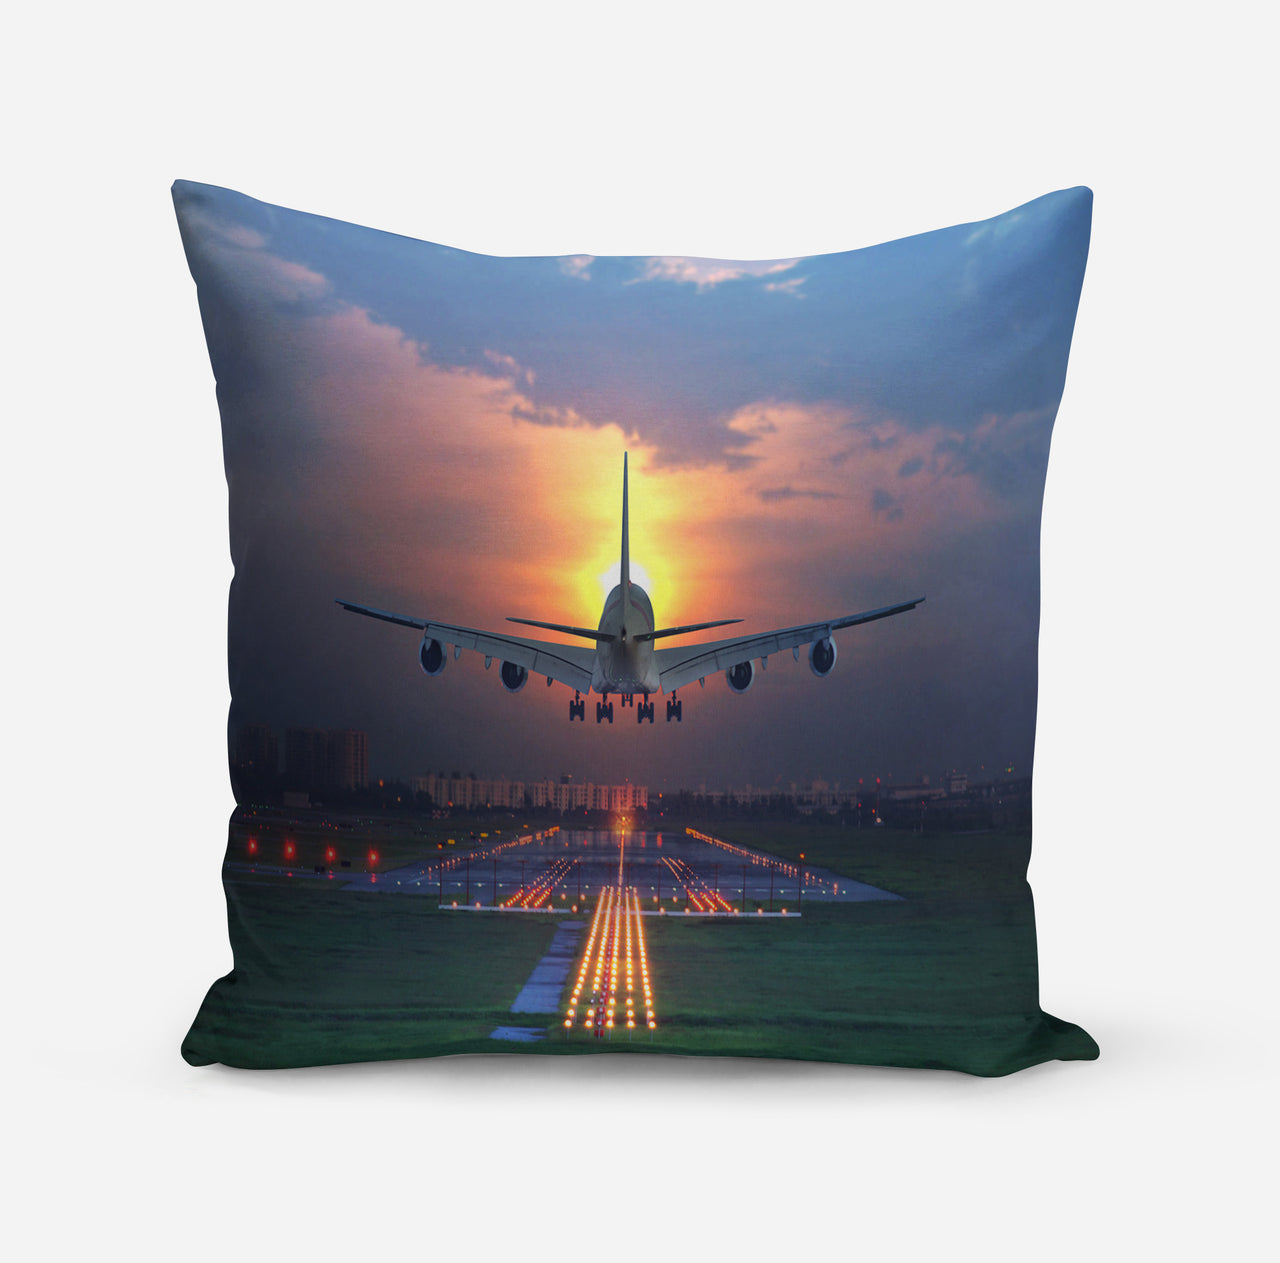 Super Airbus A380 Landing During Sunset Designed Pillows